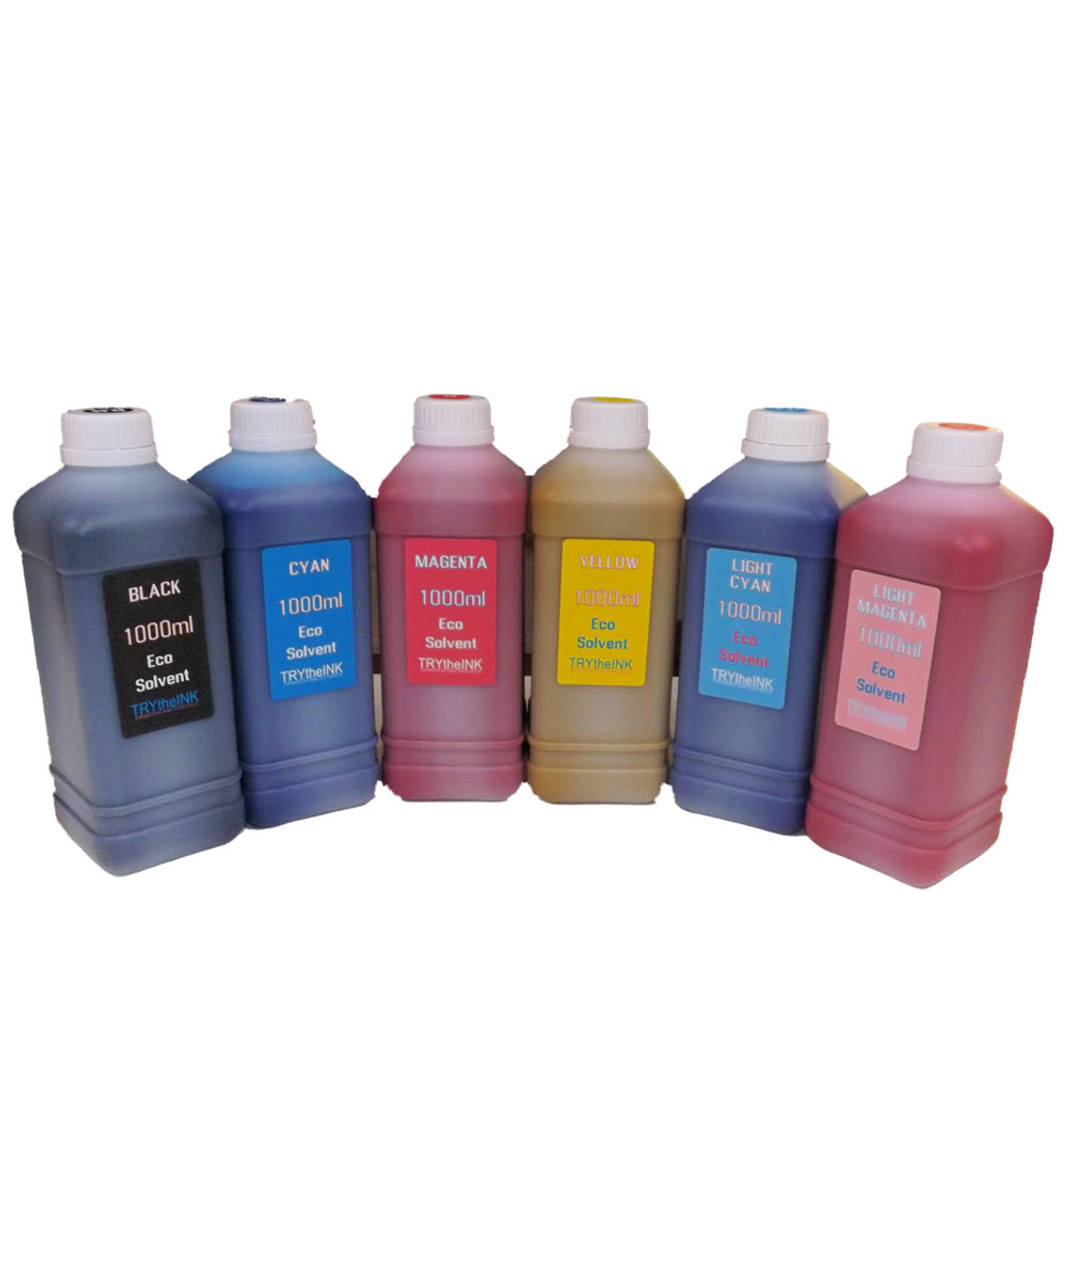 6 Color Eco Solvent Ink 1000ml bottle ink for EPSON, Roland, Mimaki, Mutoh printers 